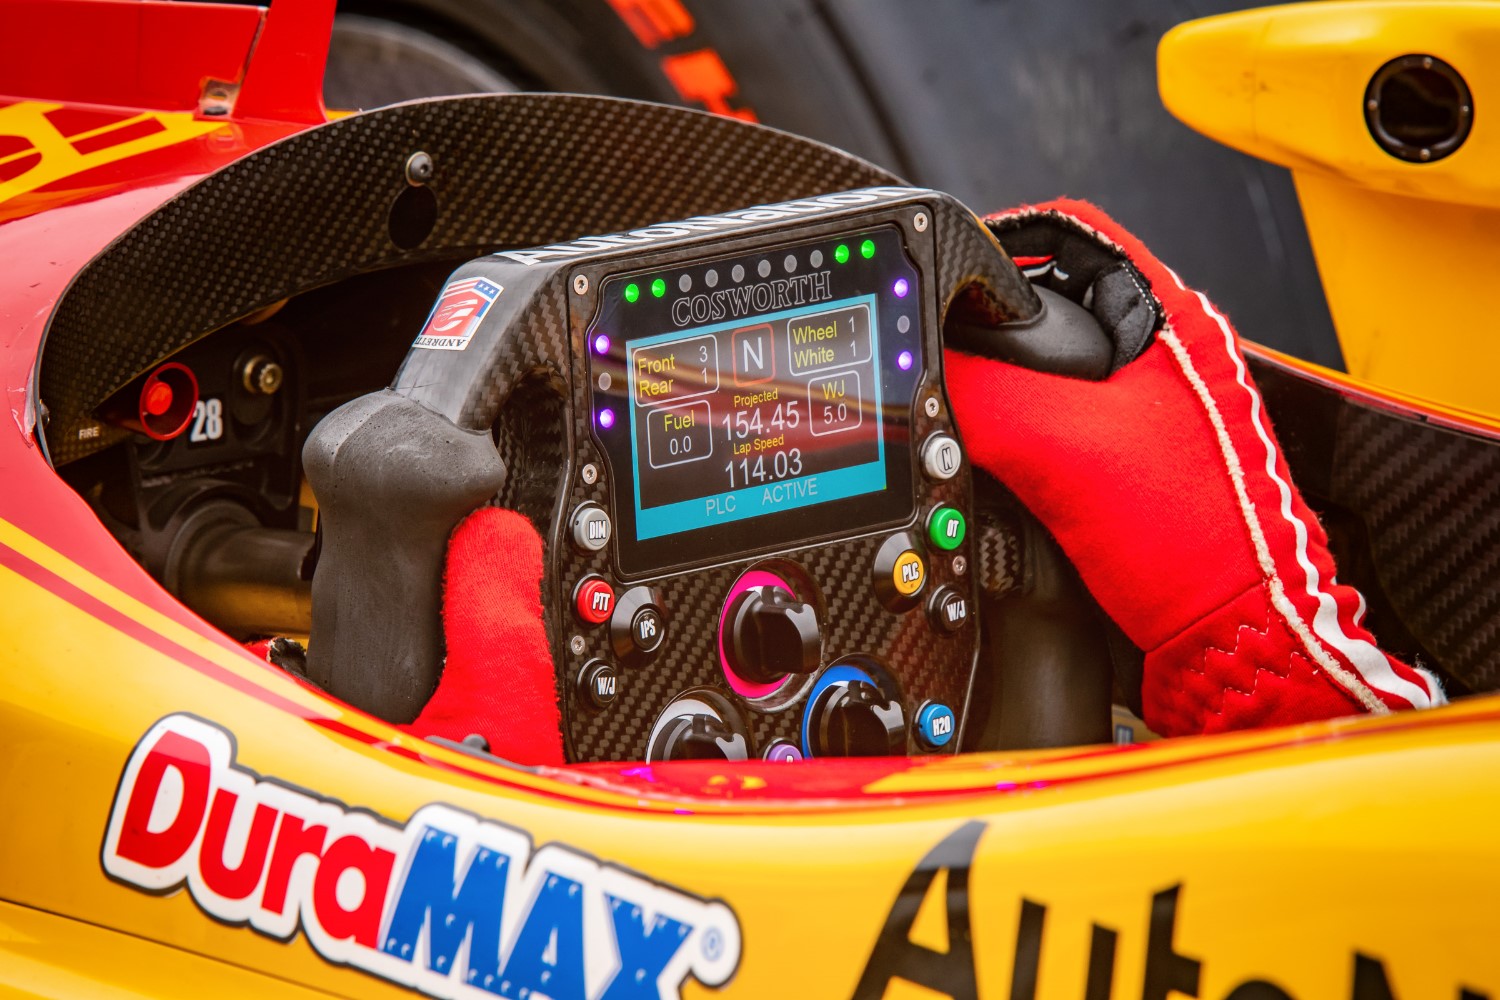 Current IndyCar steering wheel for Ryan Hunter-Reay